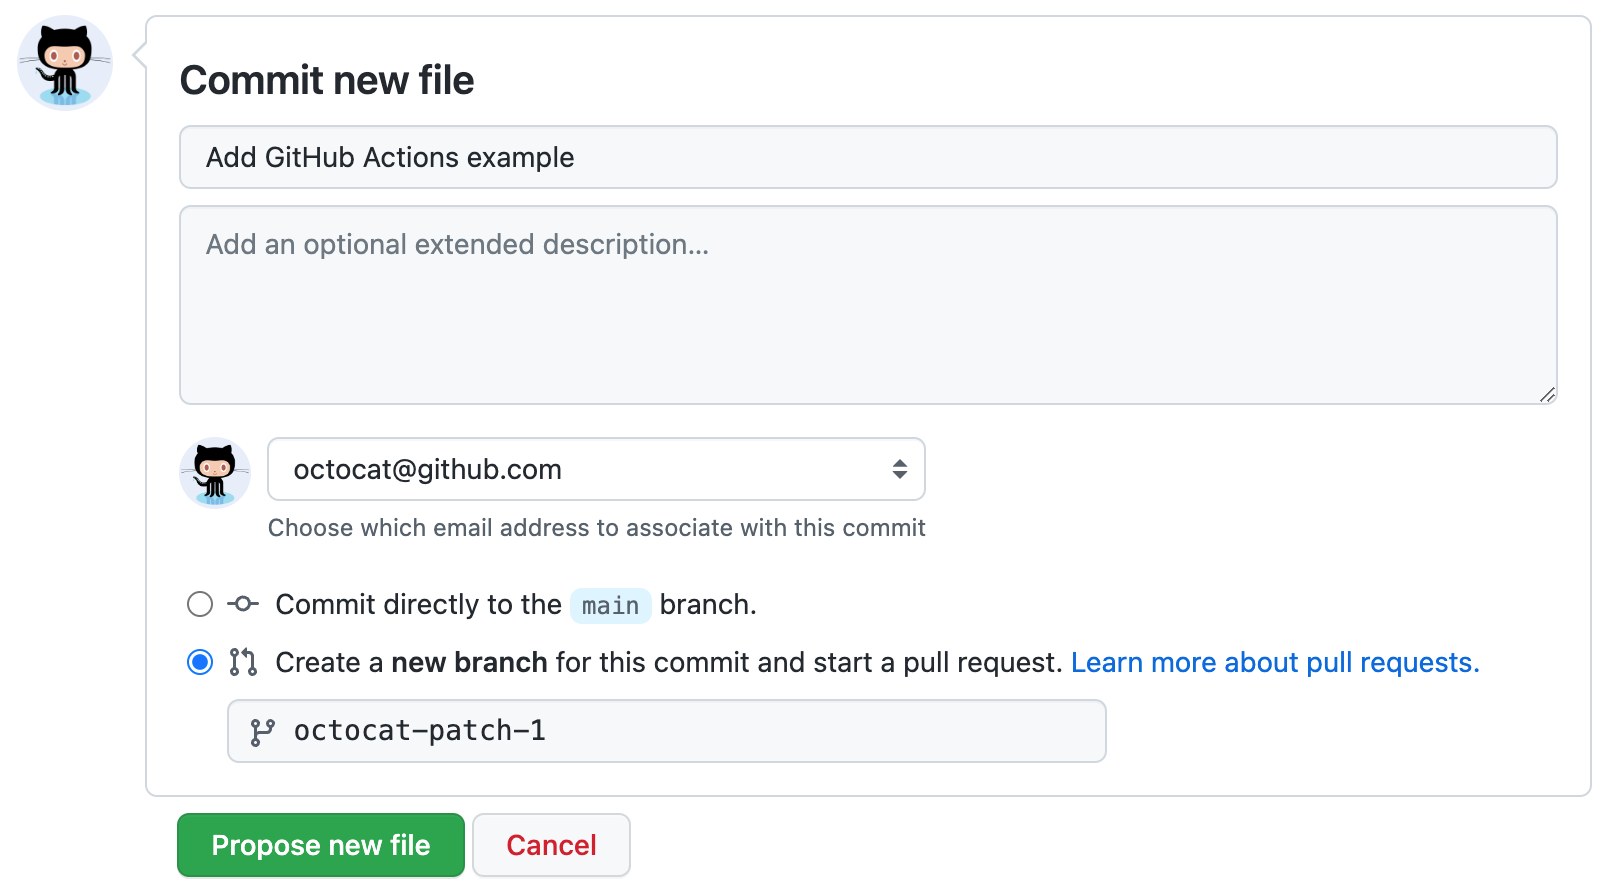 Screenshot of the "Commit new file" area of the page.